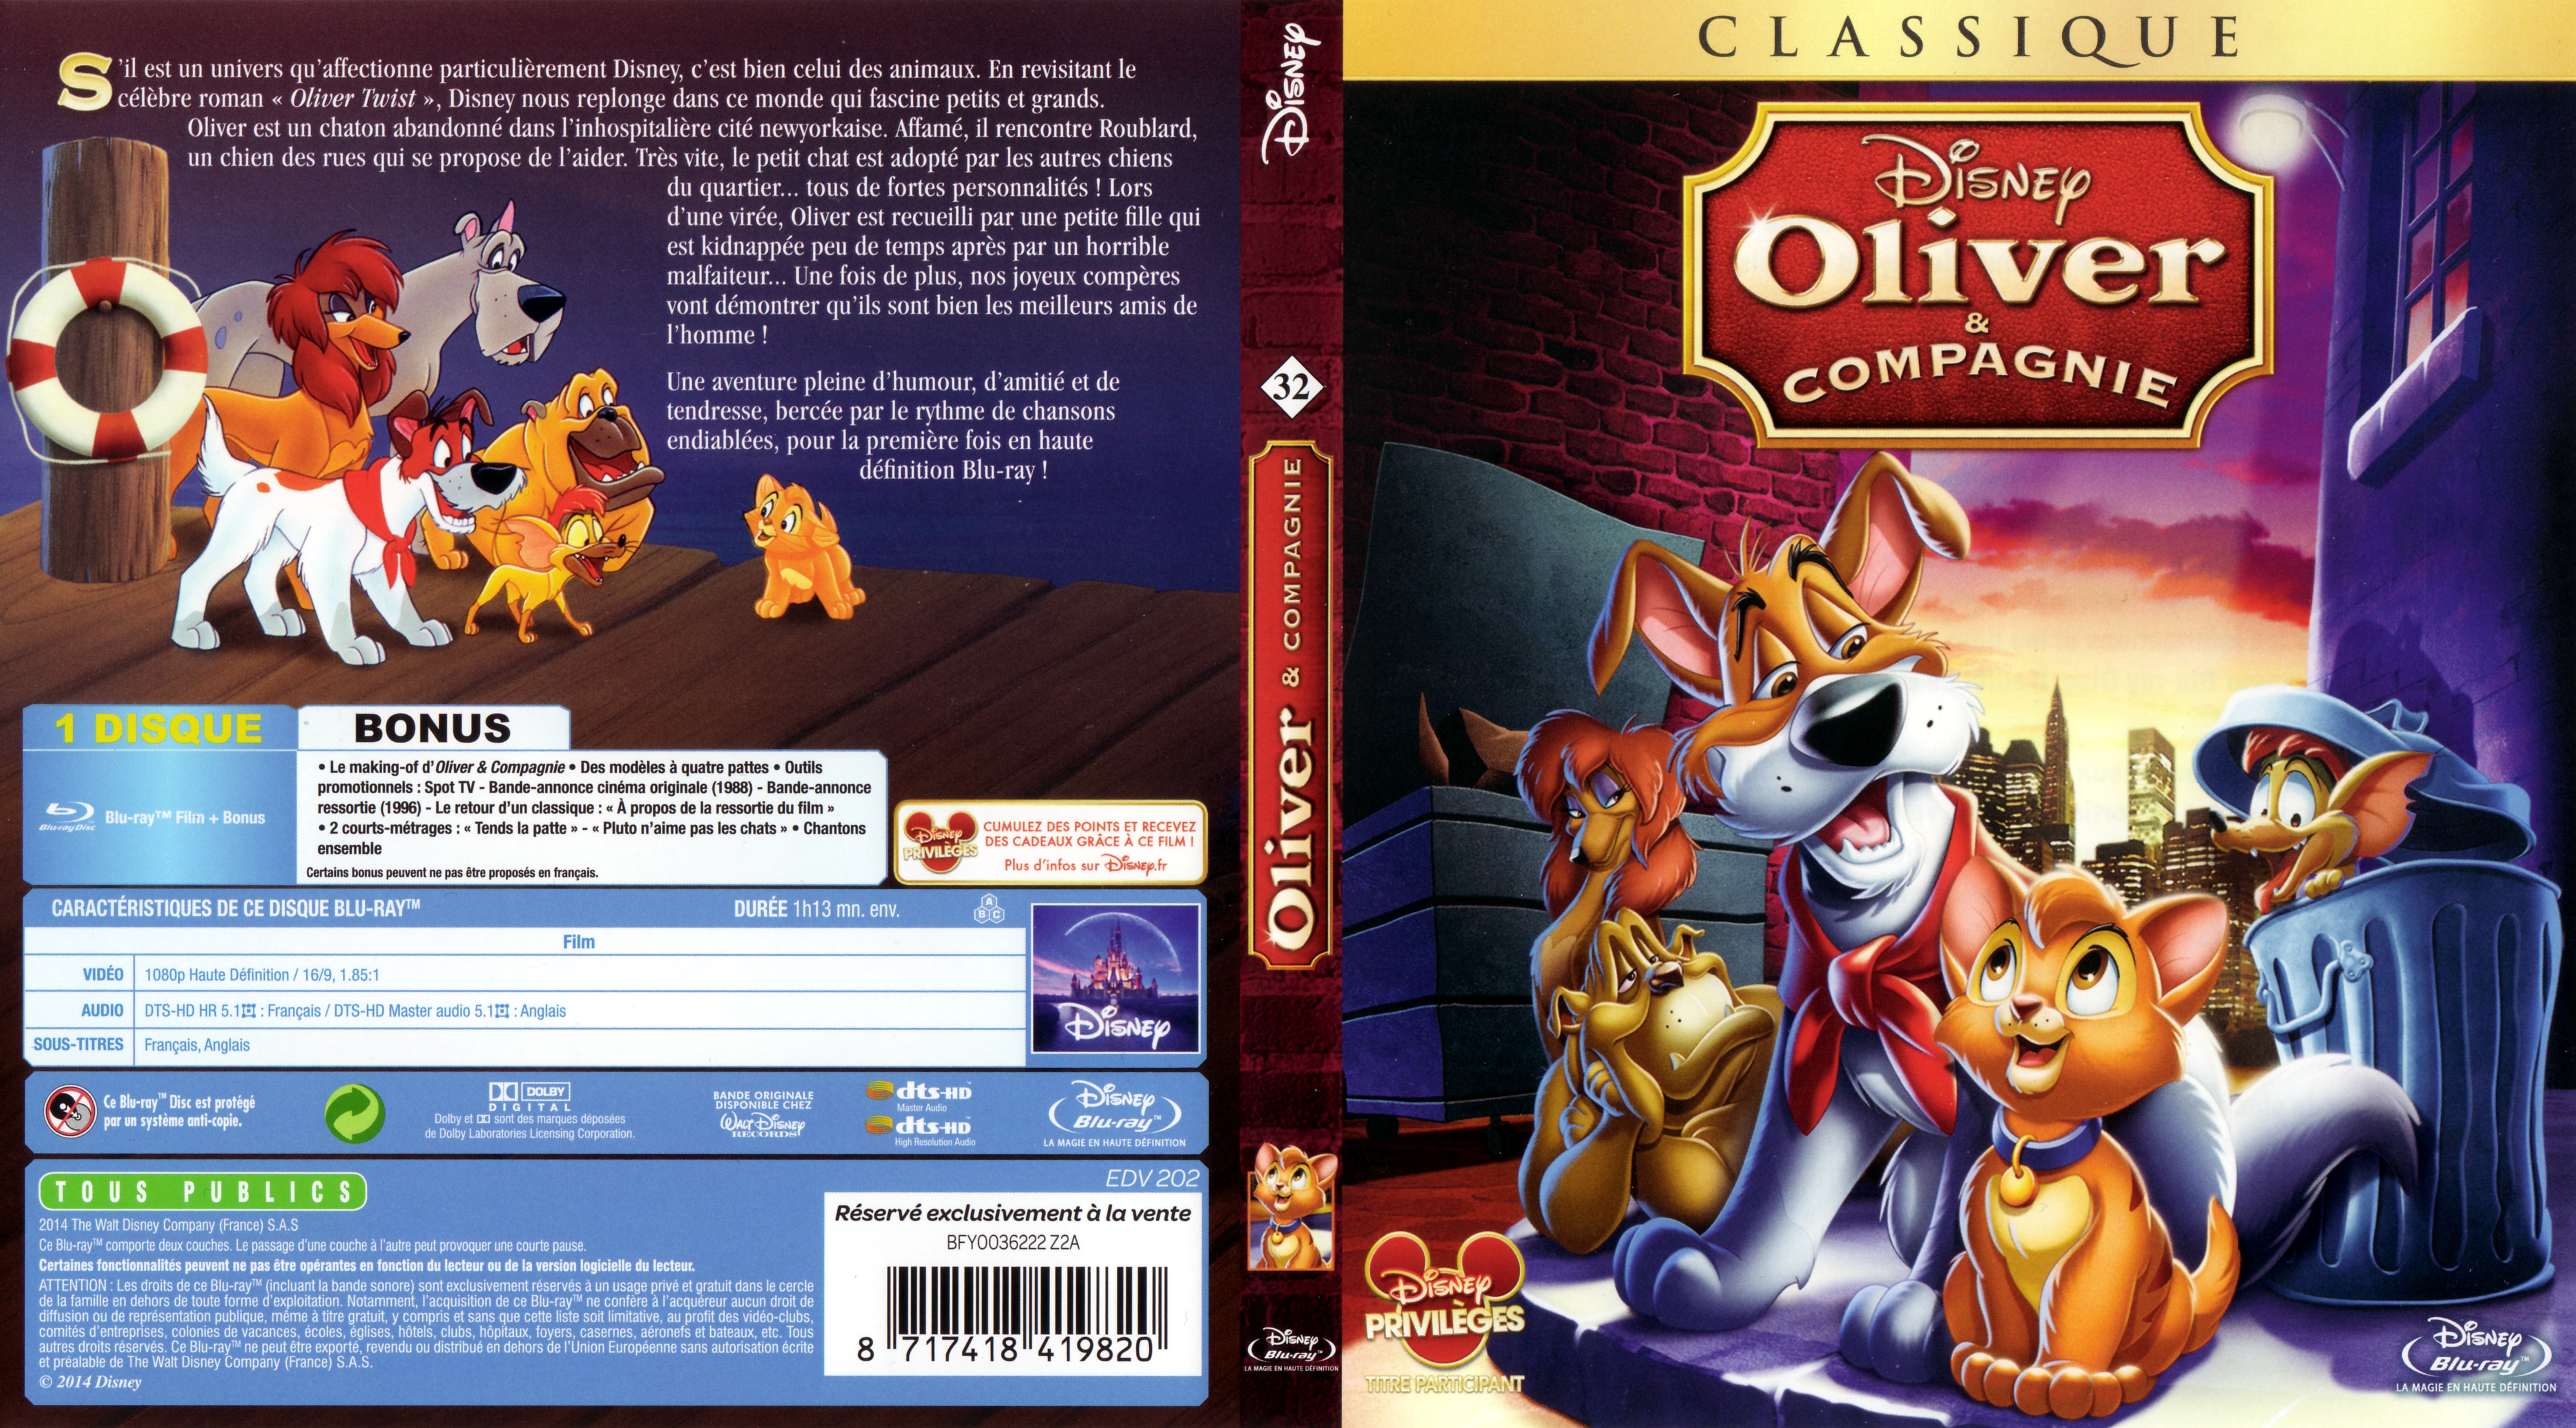 Jaquette DVD Oliver et compagnie (BLU-RAY)